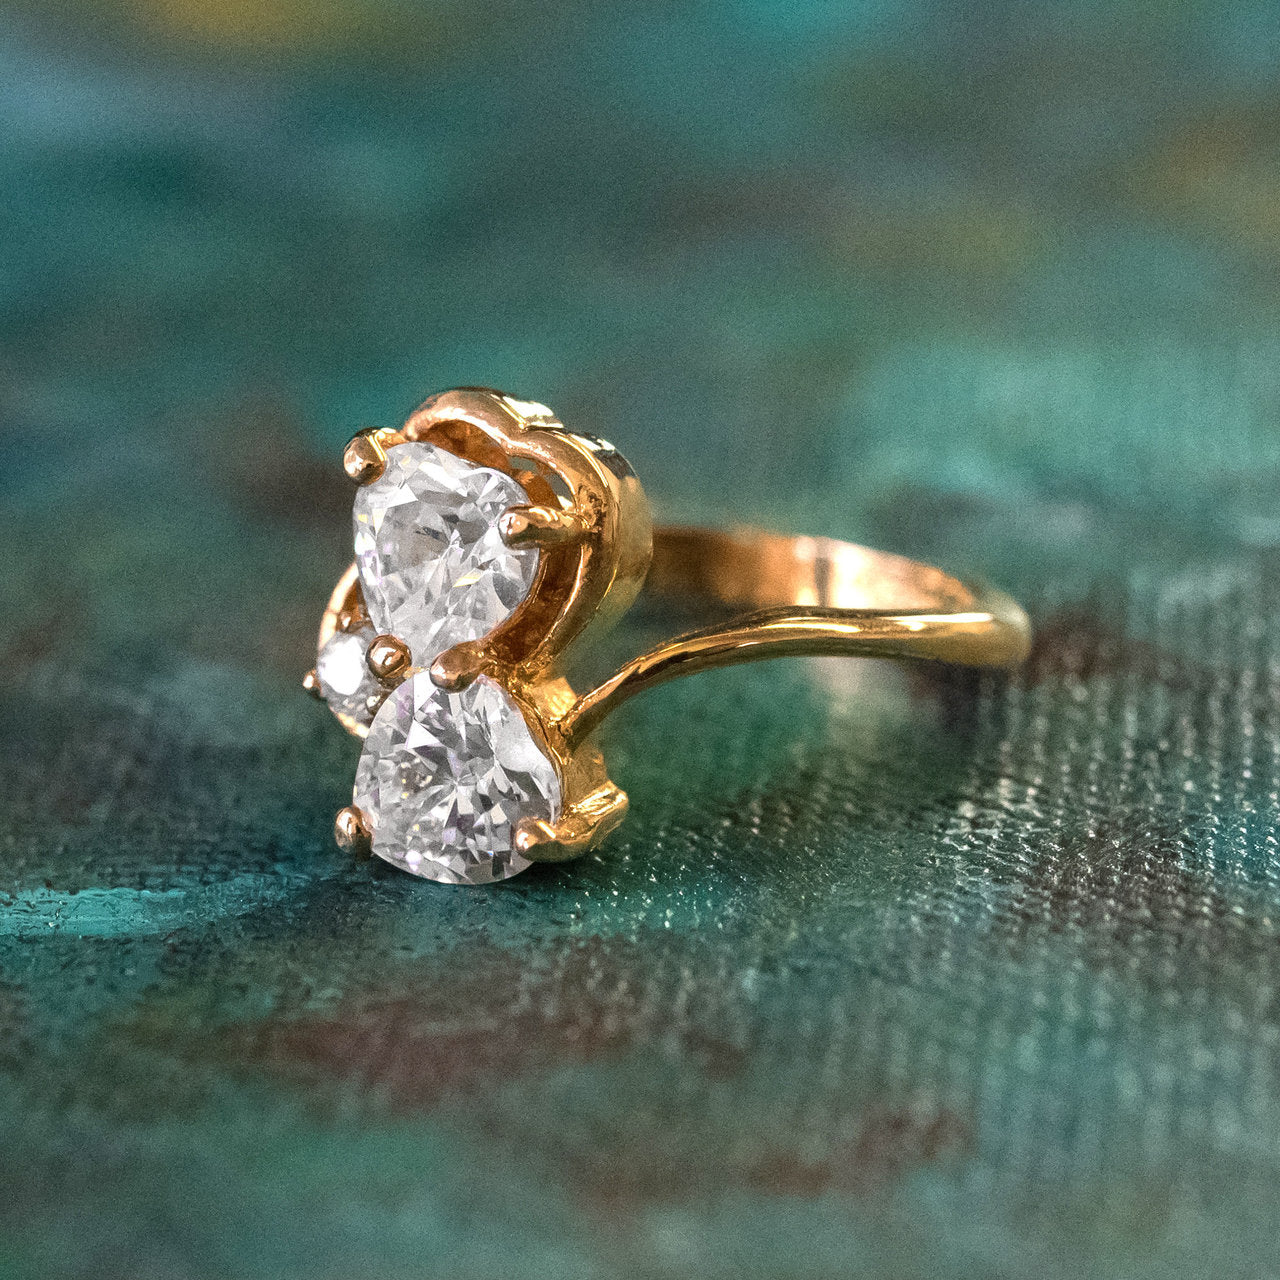 Unexpected And Unique Engagement Rings That Will Make Her Happy | Antique  wedding rings, Vintage style engagement rings, Wedding rings vintage